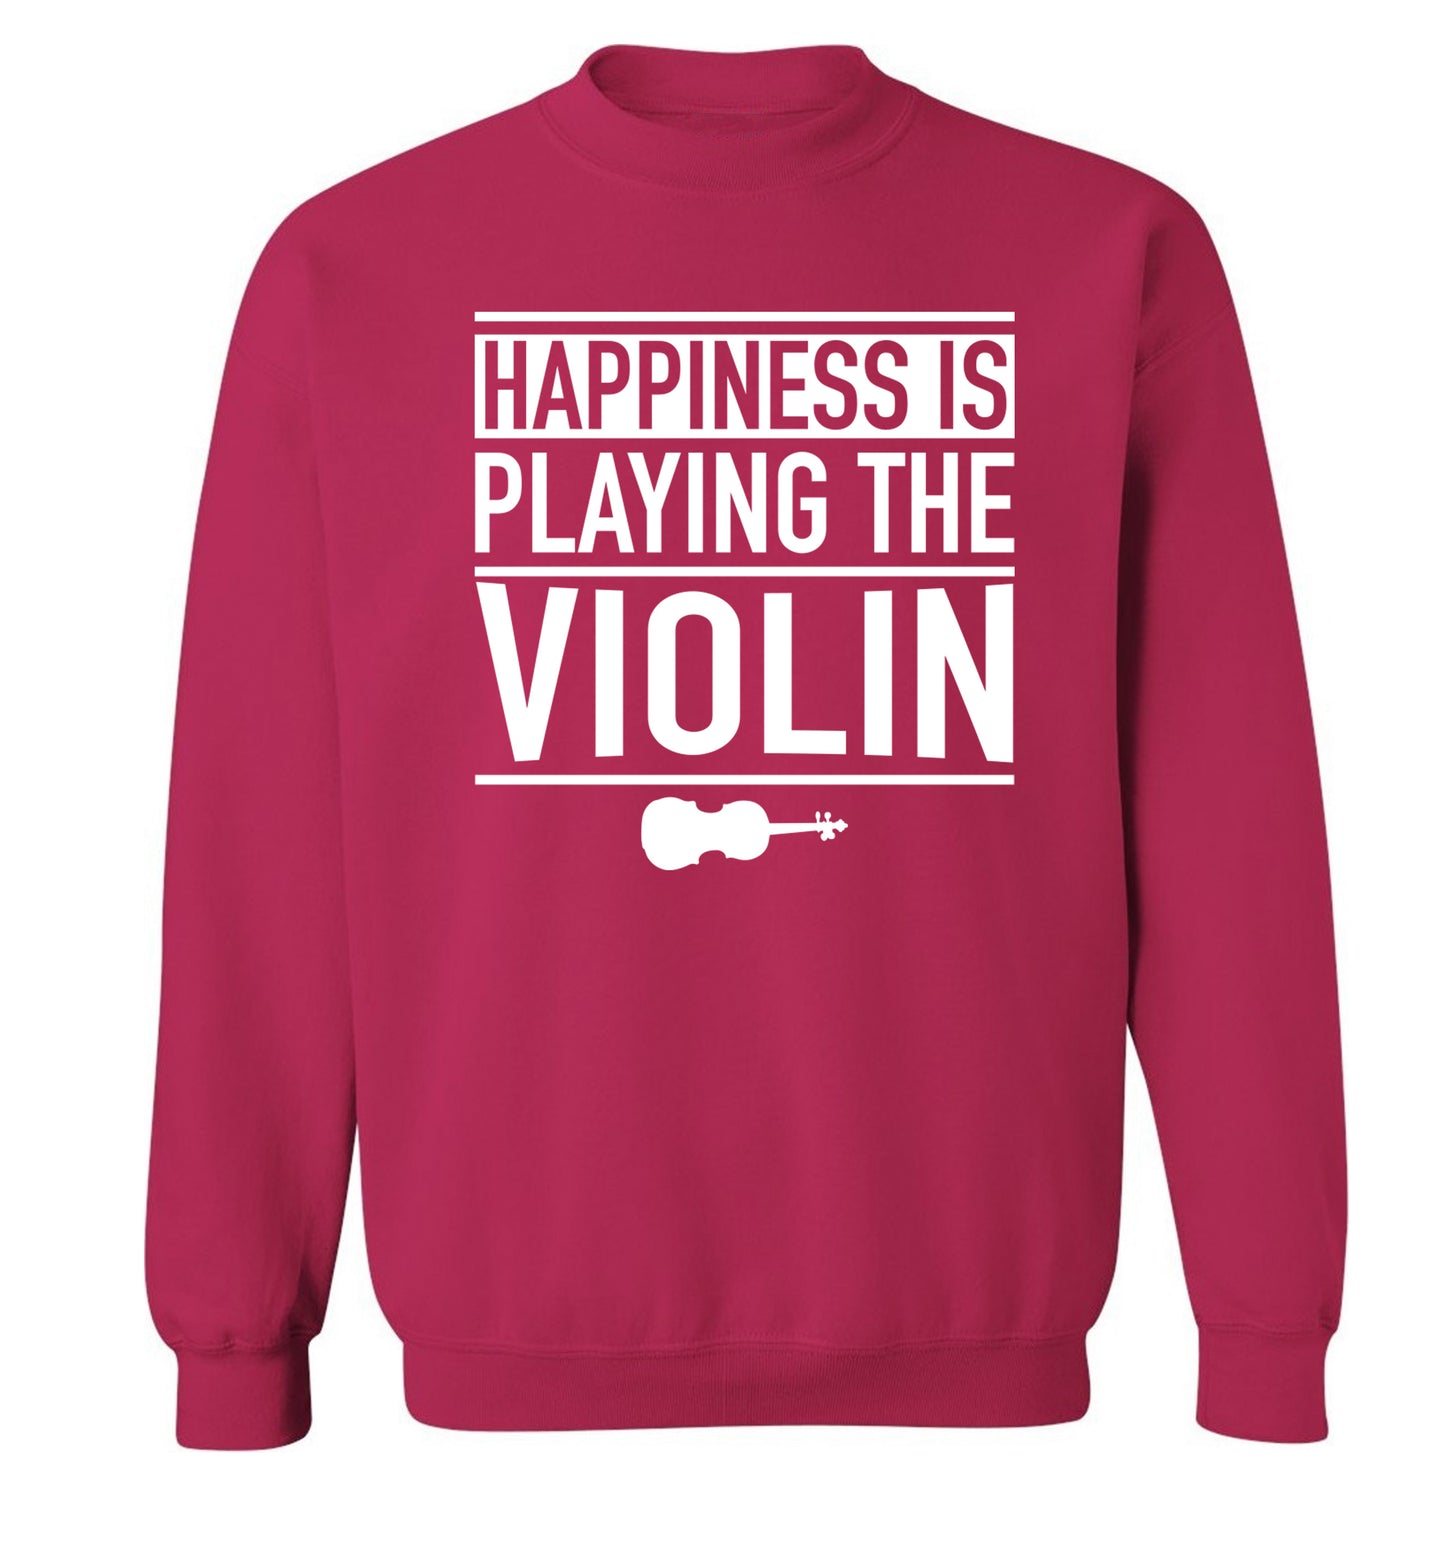 Happiness is playing the violin Adult's unisex pink Sweater 2XL